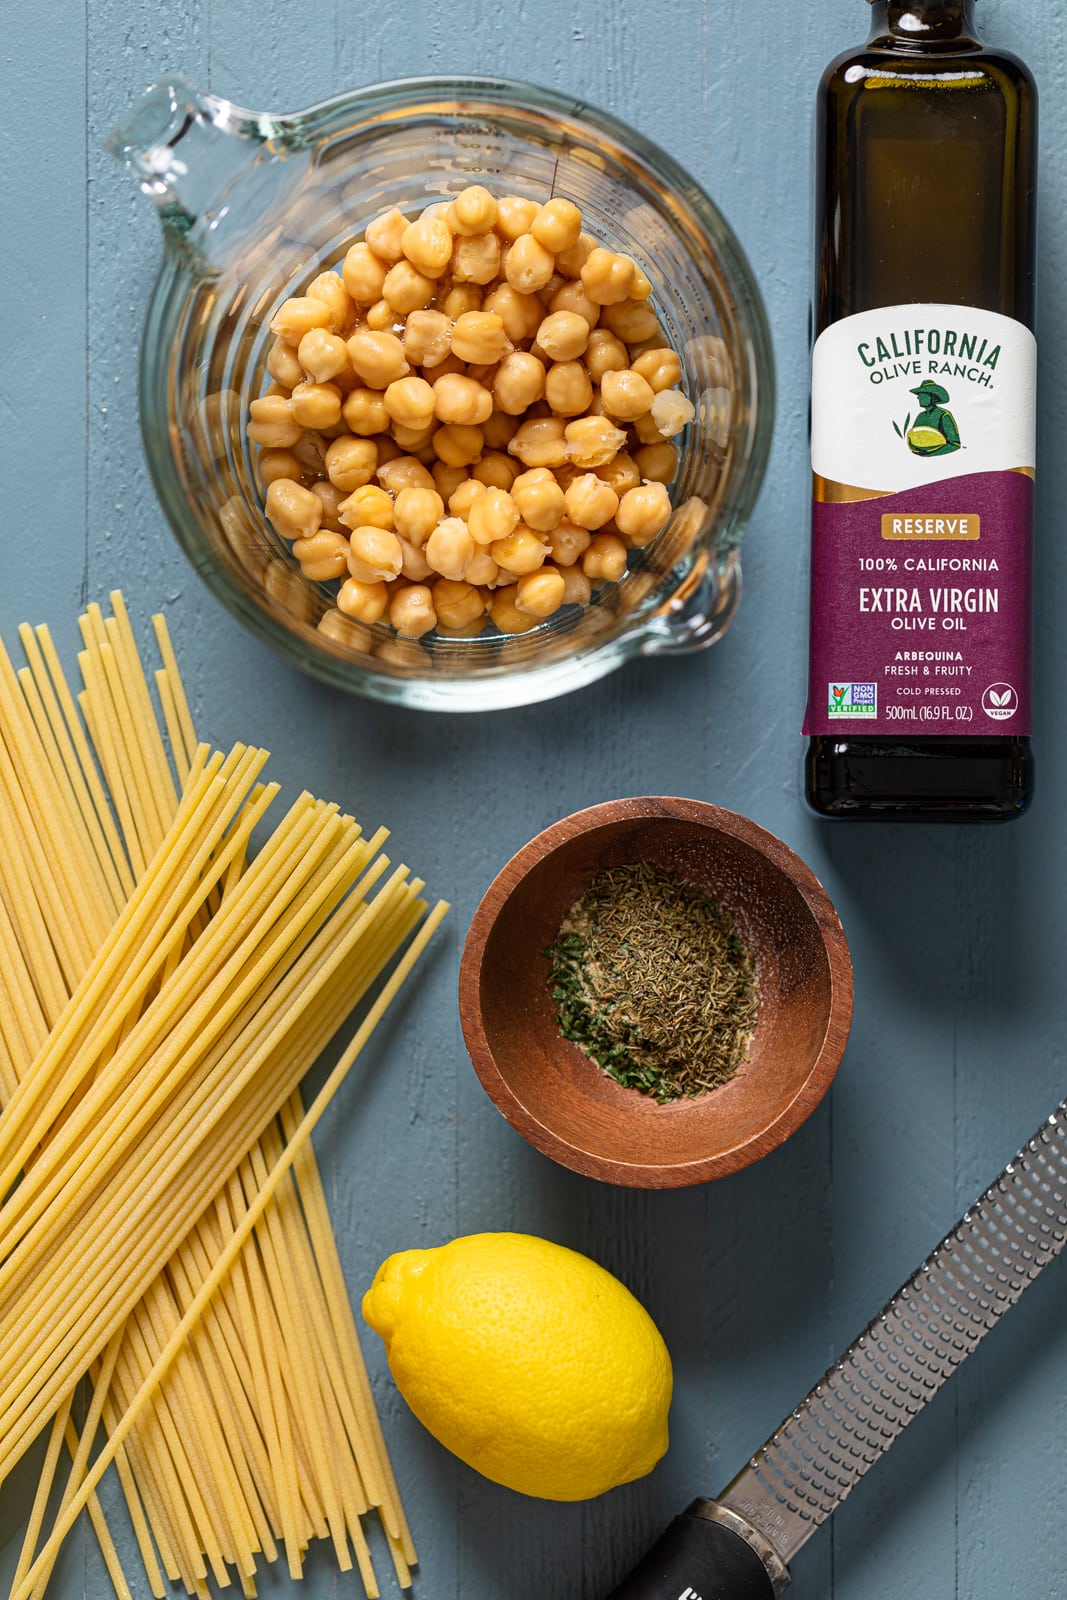 Ingredients for Lemon Herb Roasted Chickpeas and Bucatini including a lemon, olive oil, and chickpeas